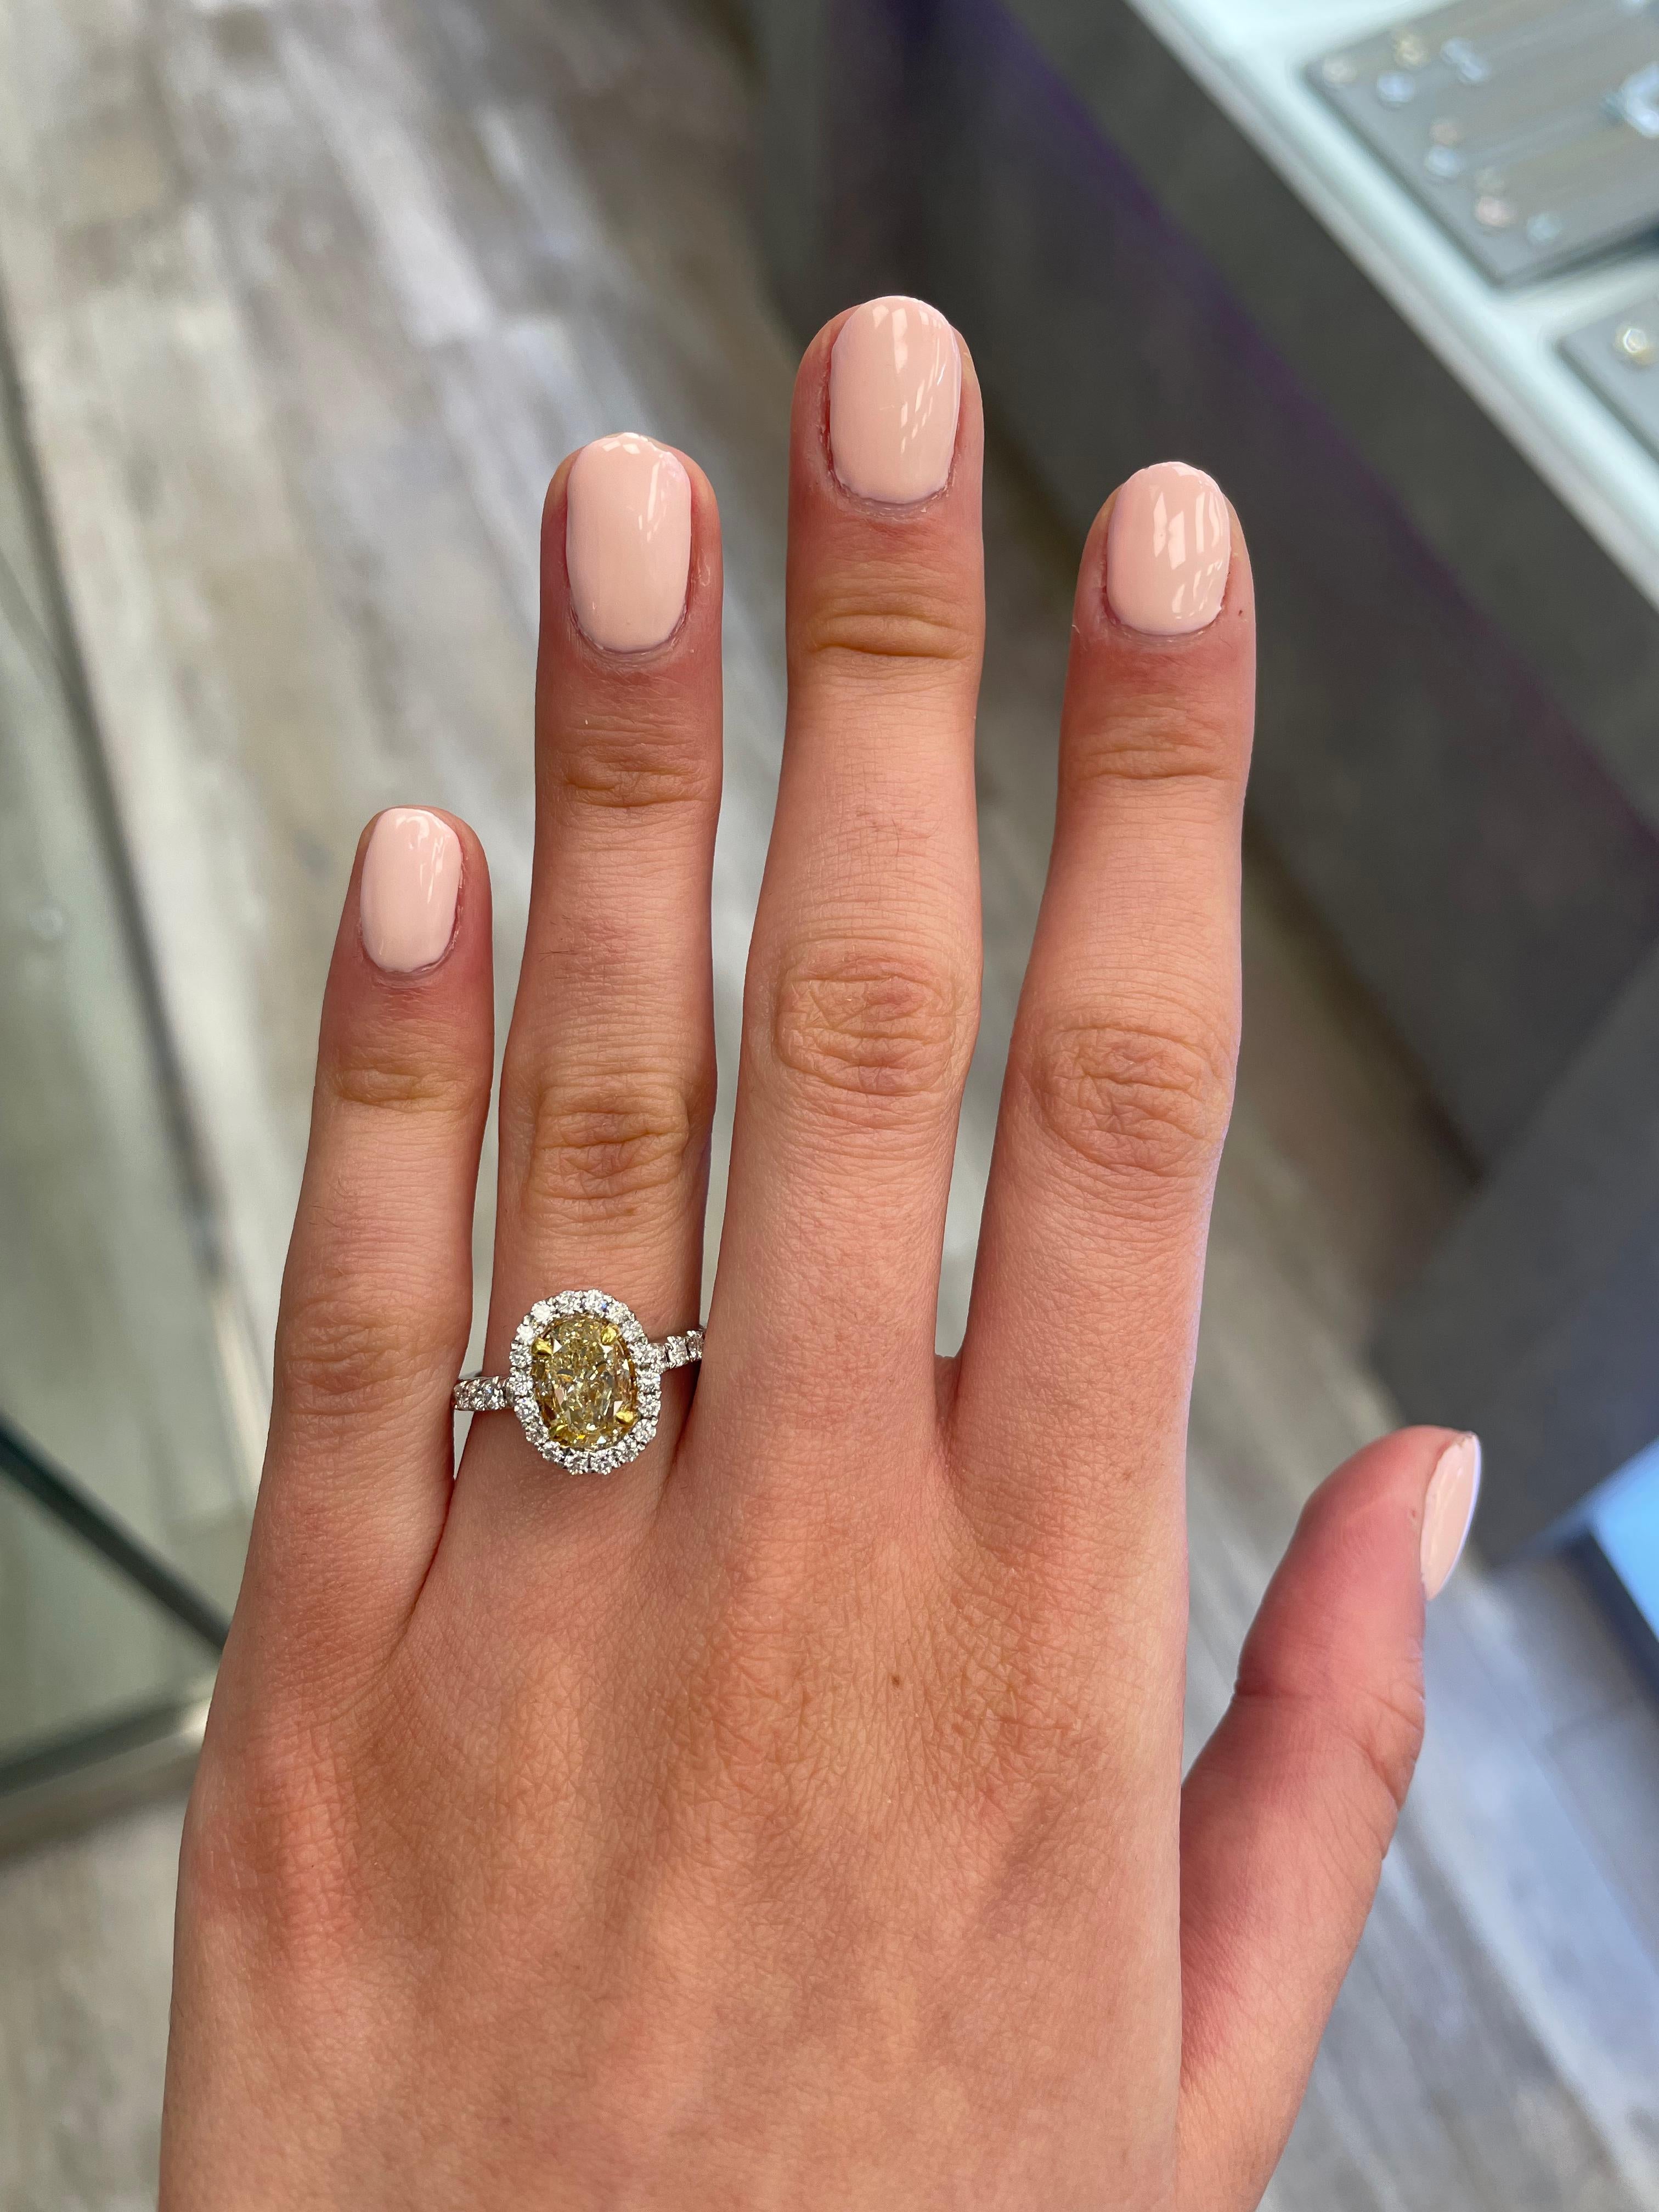 Stunning modern EGL certified yellow diamond with halo ring, two-tone 18k yellow and white gold, split shank. By Alexander Beverly Hills
2.66 carats total diamond weight.
2.05 carat cushion/oval cut Fancy Yellow color and SI1 clarity diamond, EGL